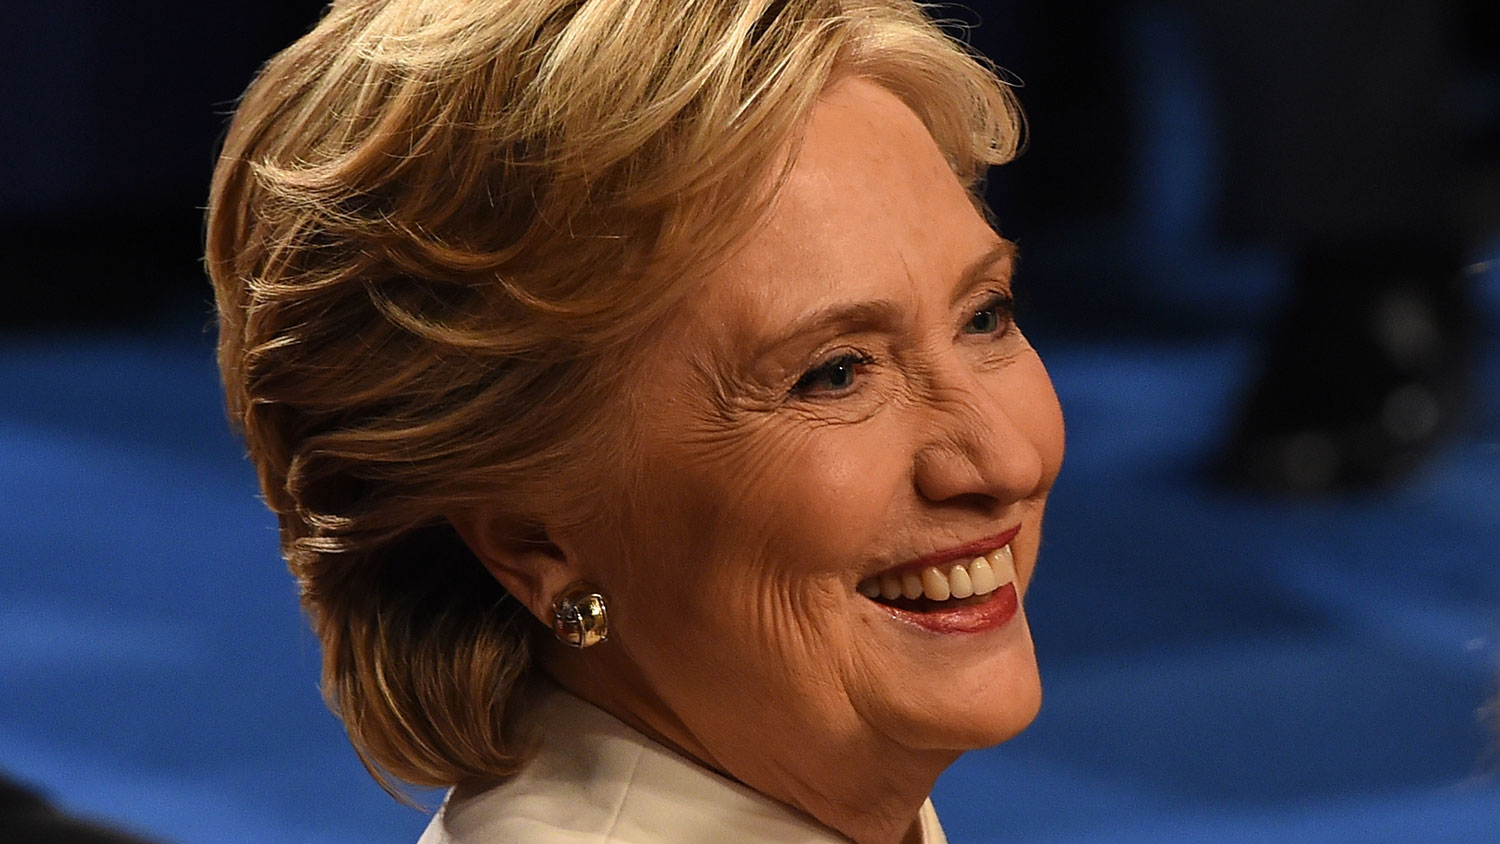 Democratic presidential nominee Hillary Clinton smiles after the final presidential debate in Las Vegas on Oct. 19, 2016.
